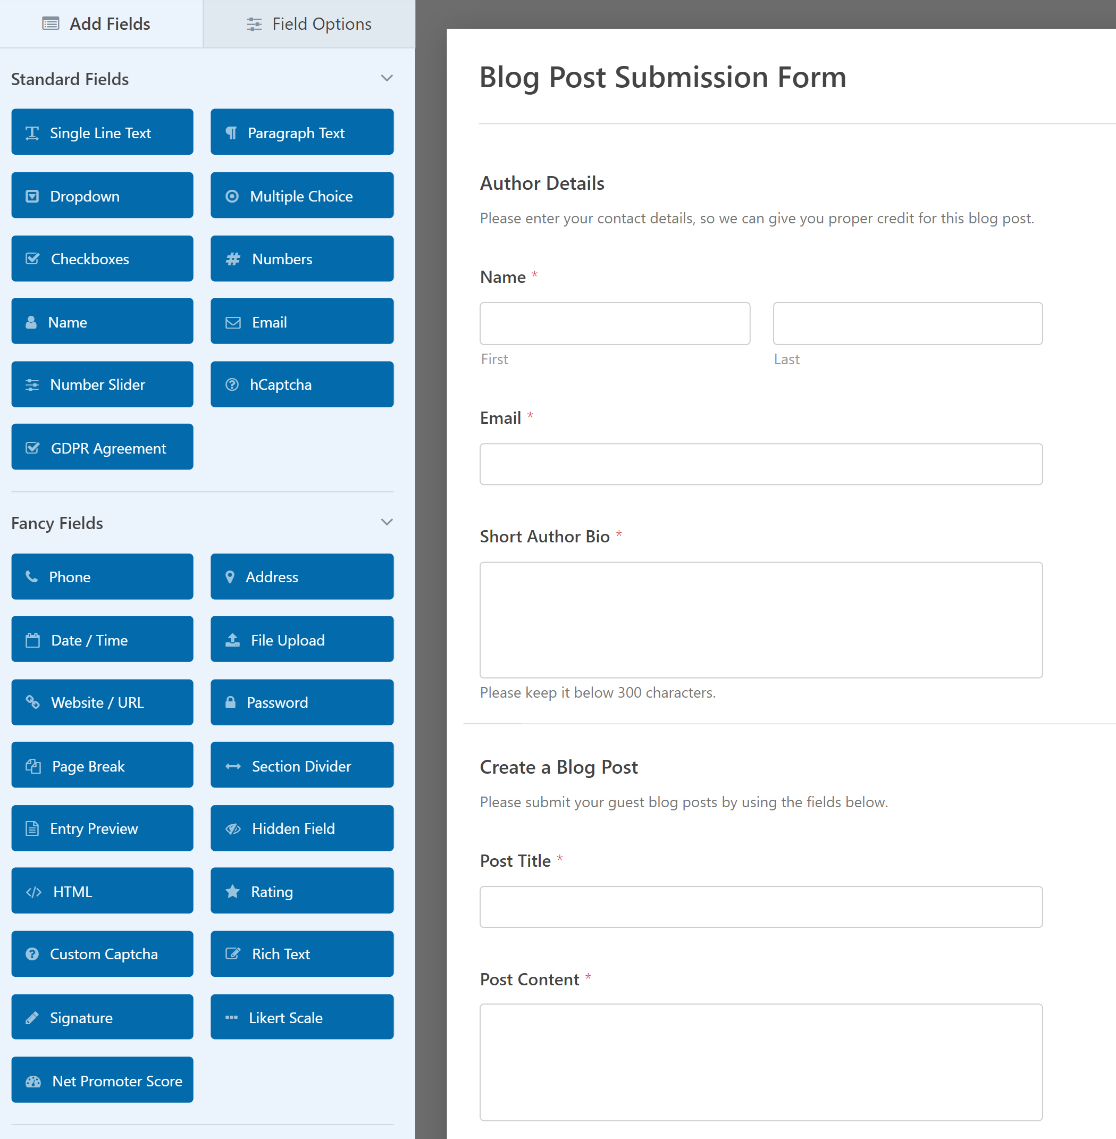 A blog post submission form in the WPForms form builder